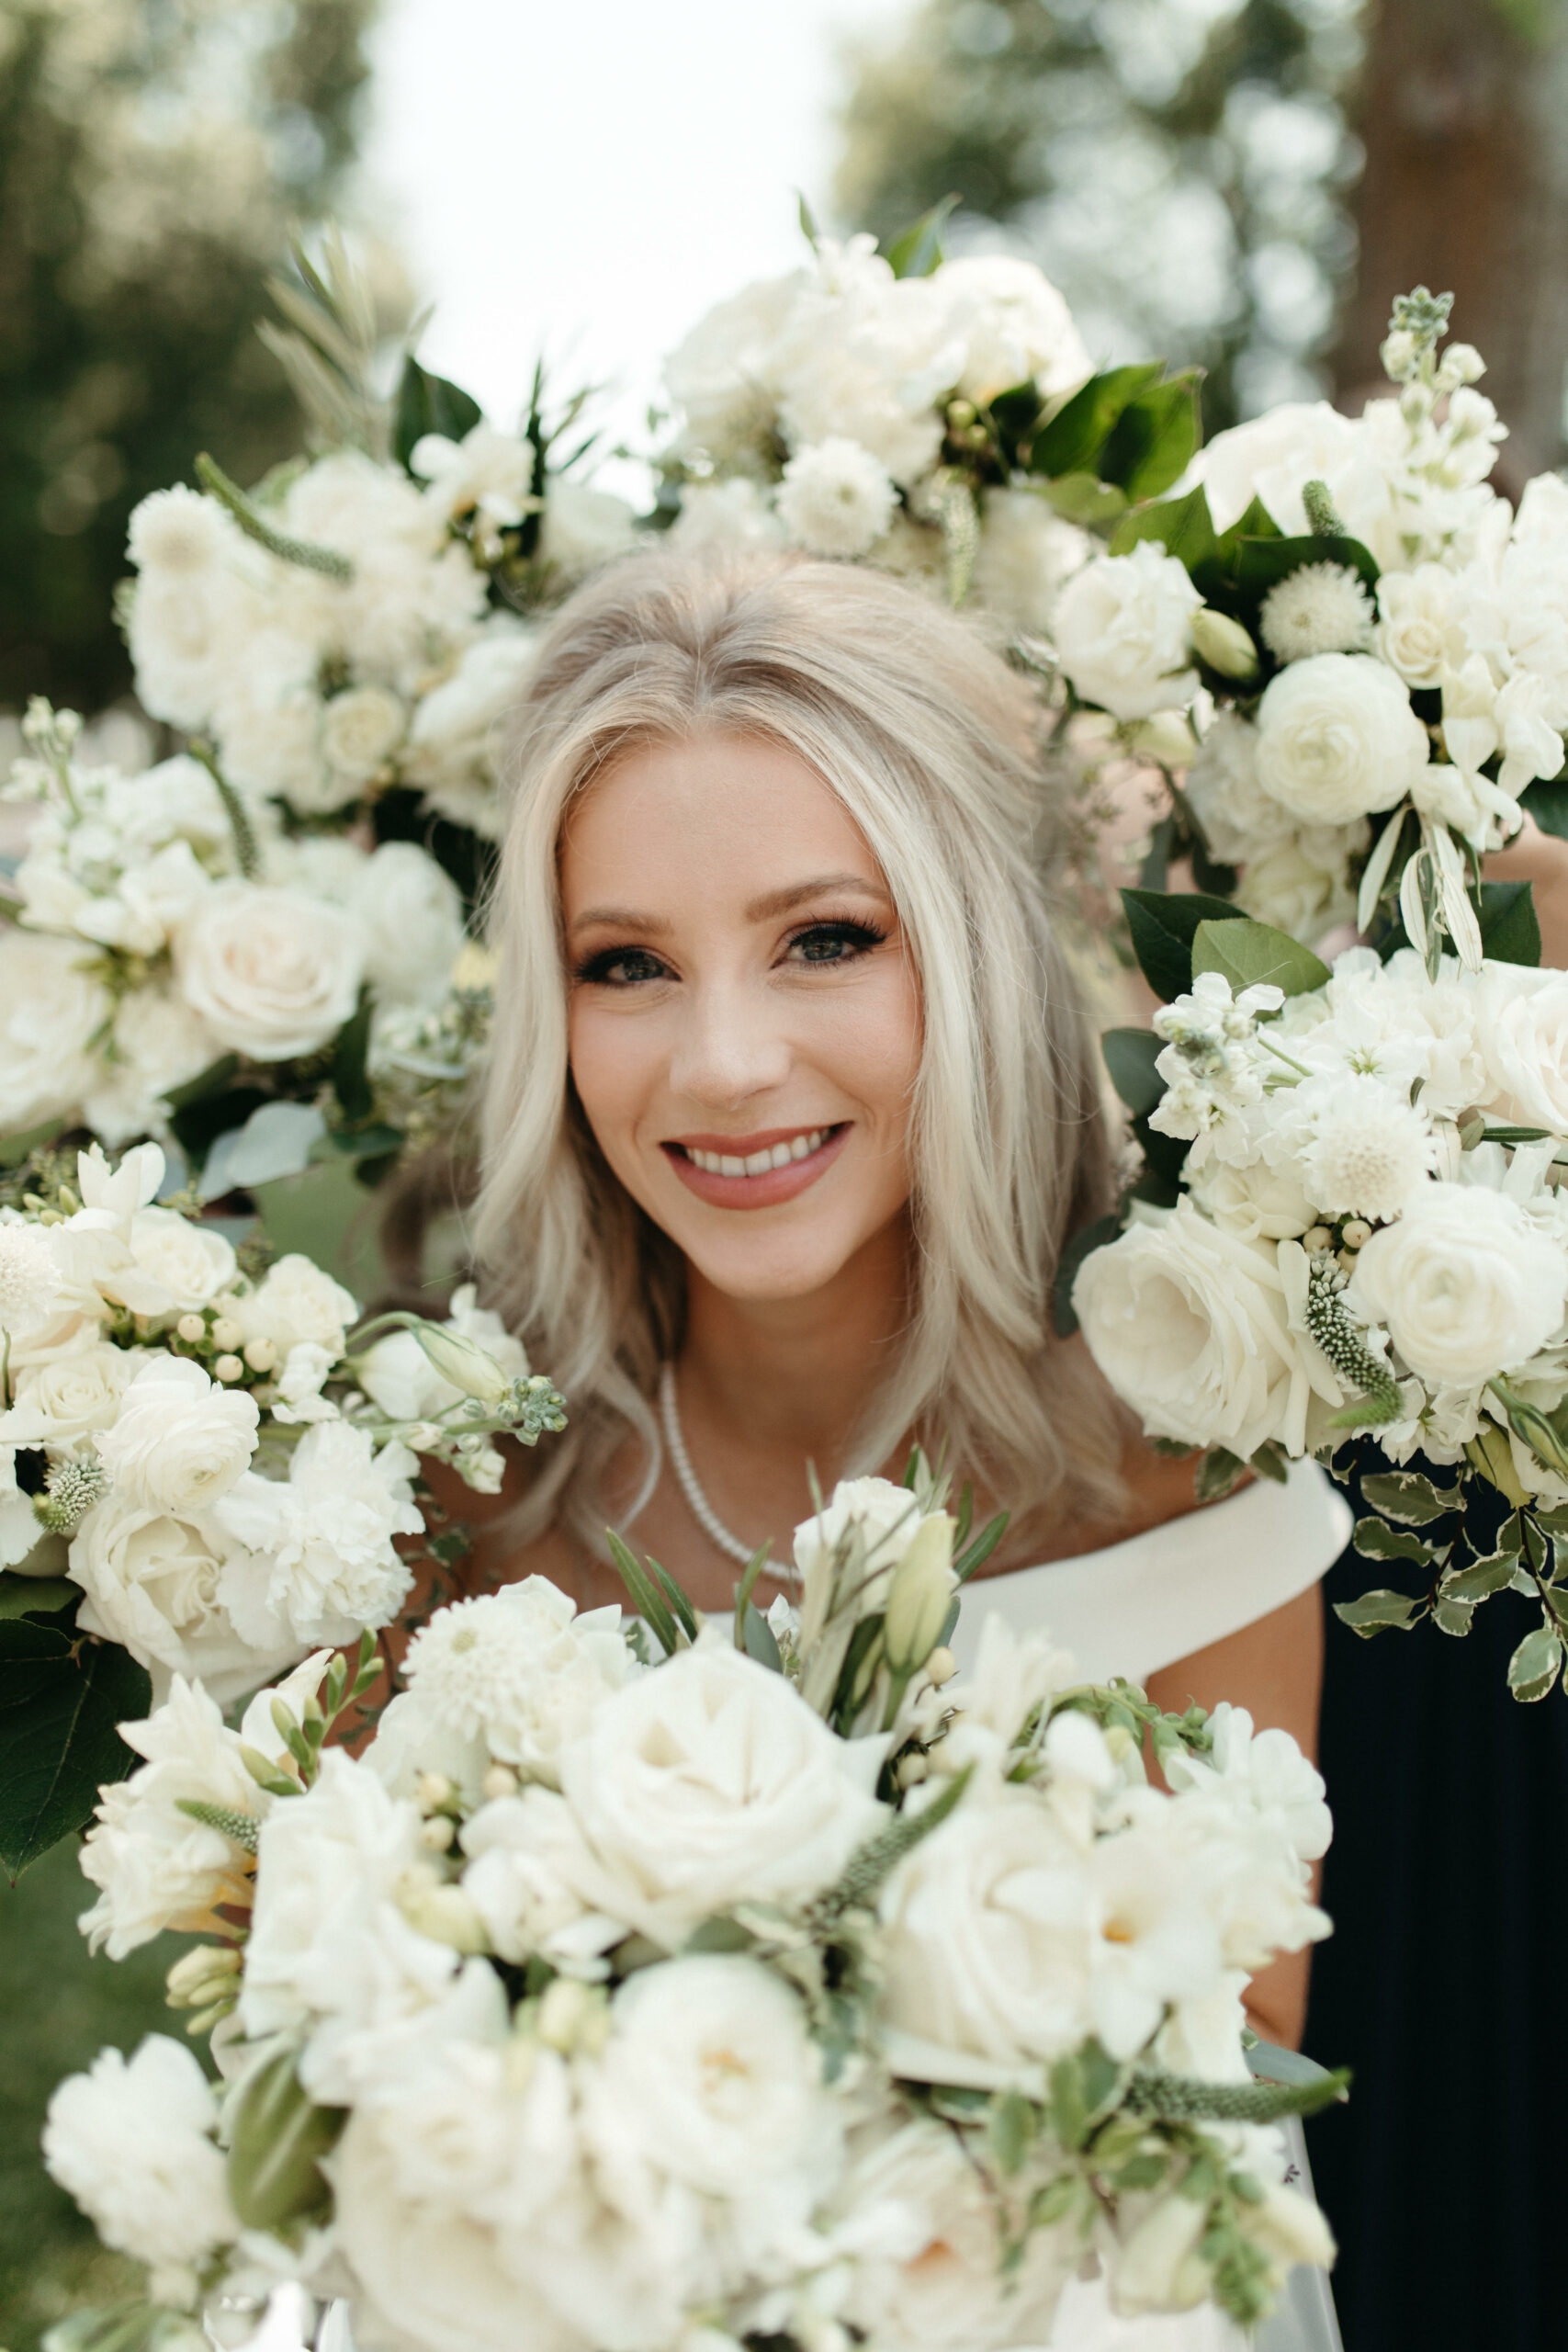 Fluffy white wedding bouquets encircling the bride's face